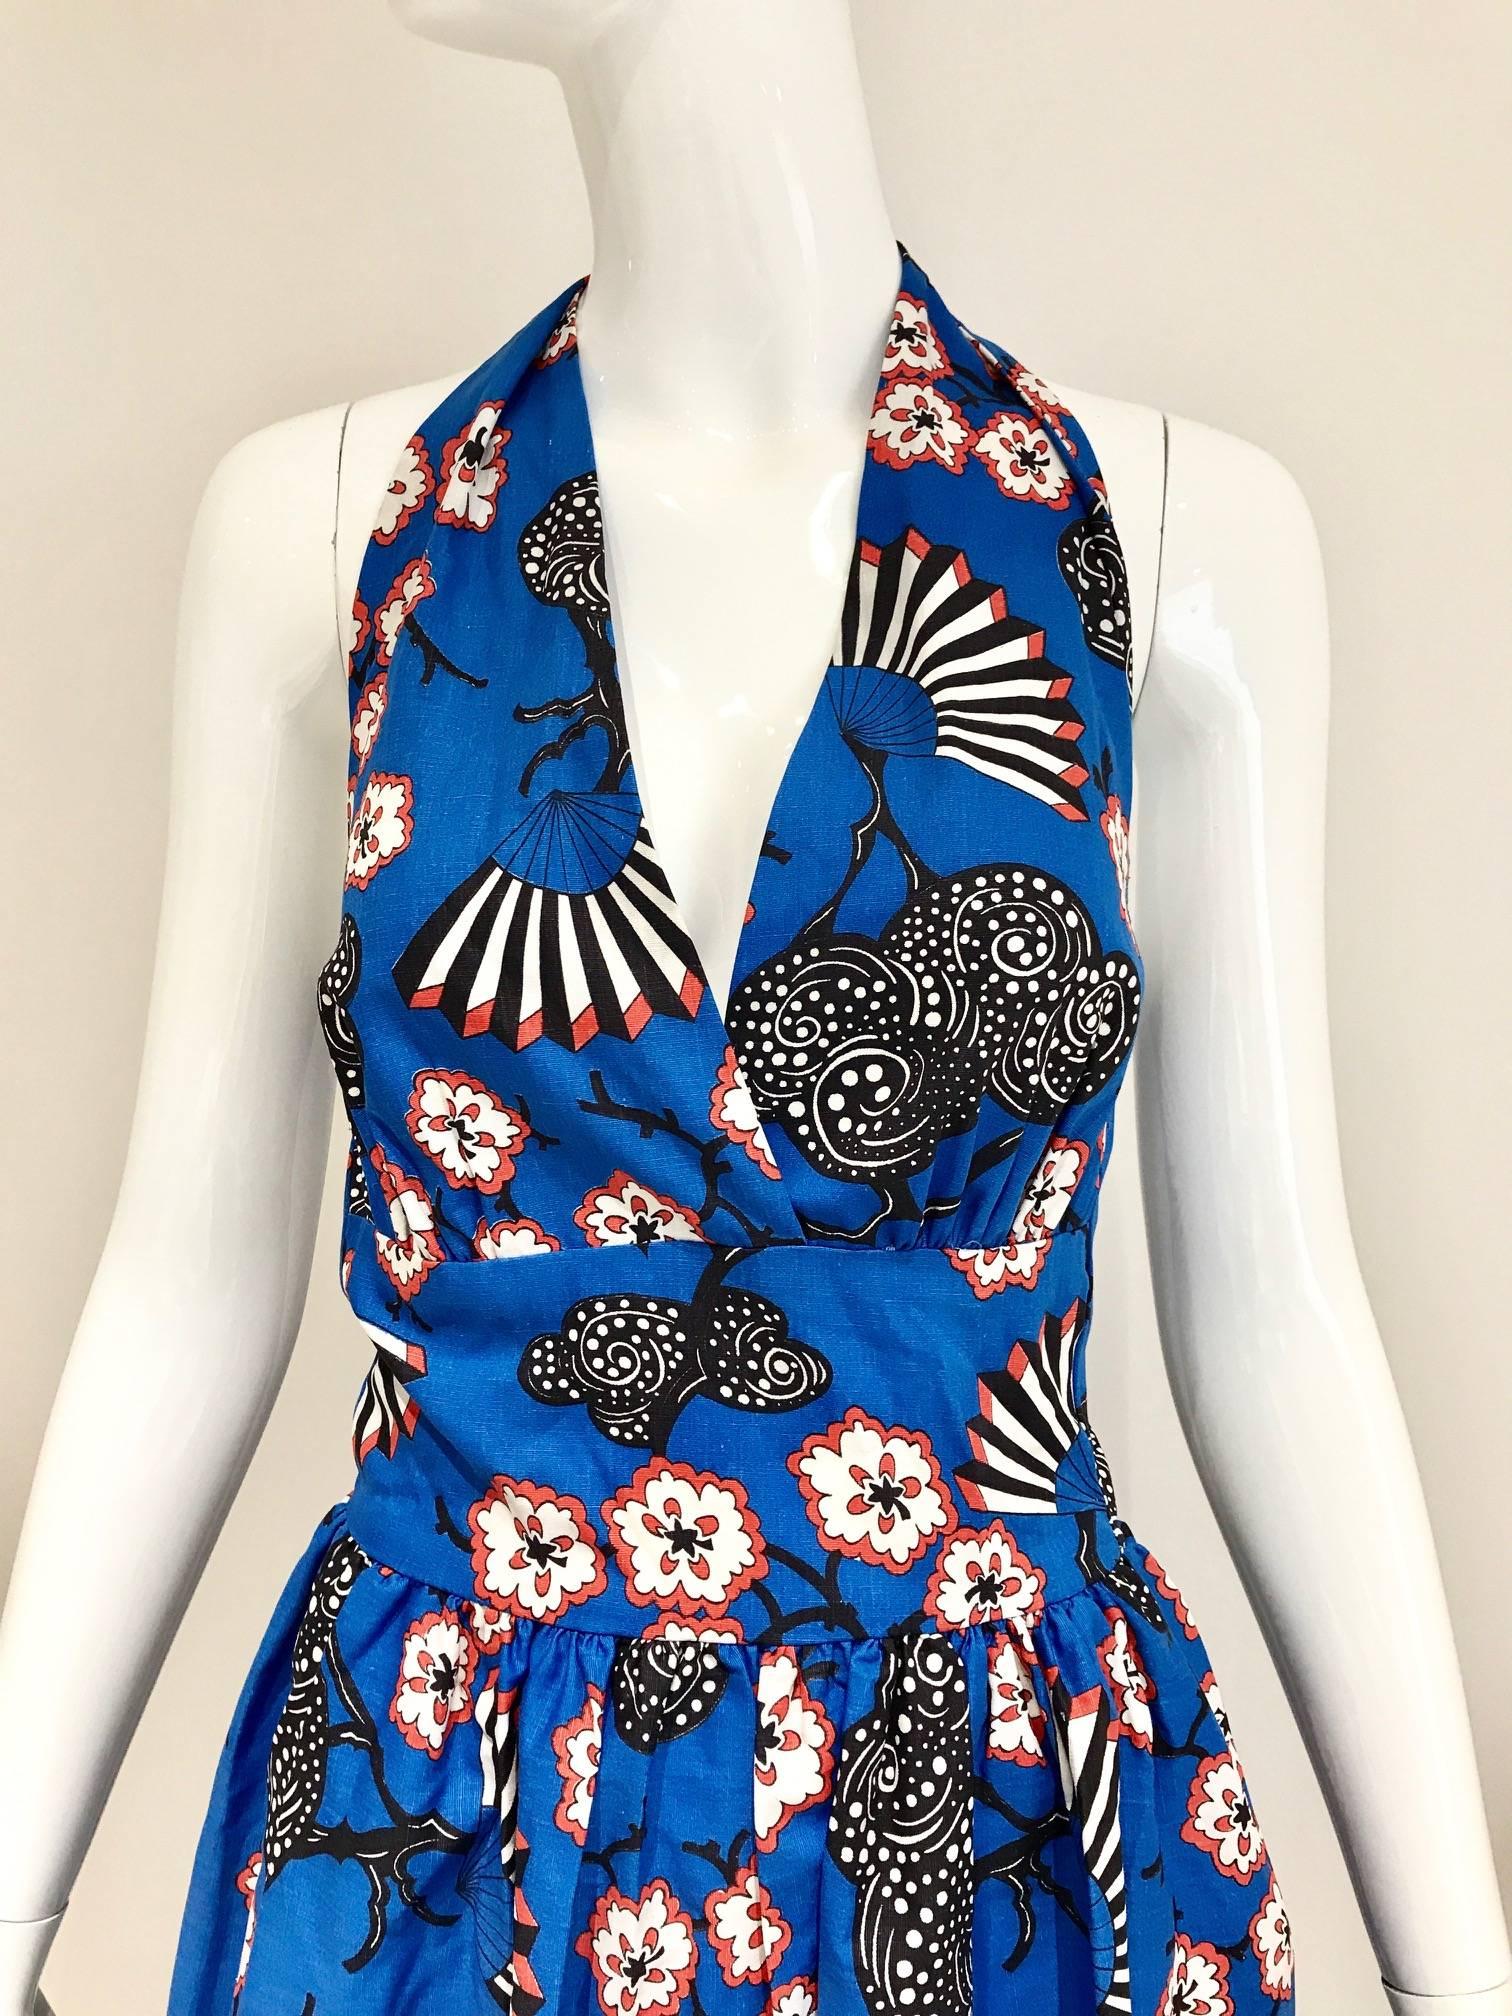 What a fun summer halter maxi dress! Vintage 70s blue cotton blossom print in black, white and print. Size : Small
Bust: 34 inch / Waist : 24 inch /  Length: 59 inch